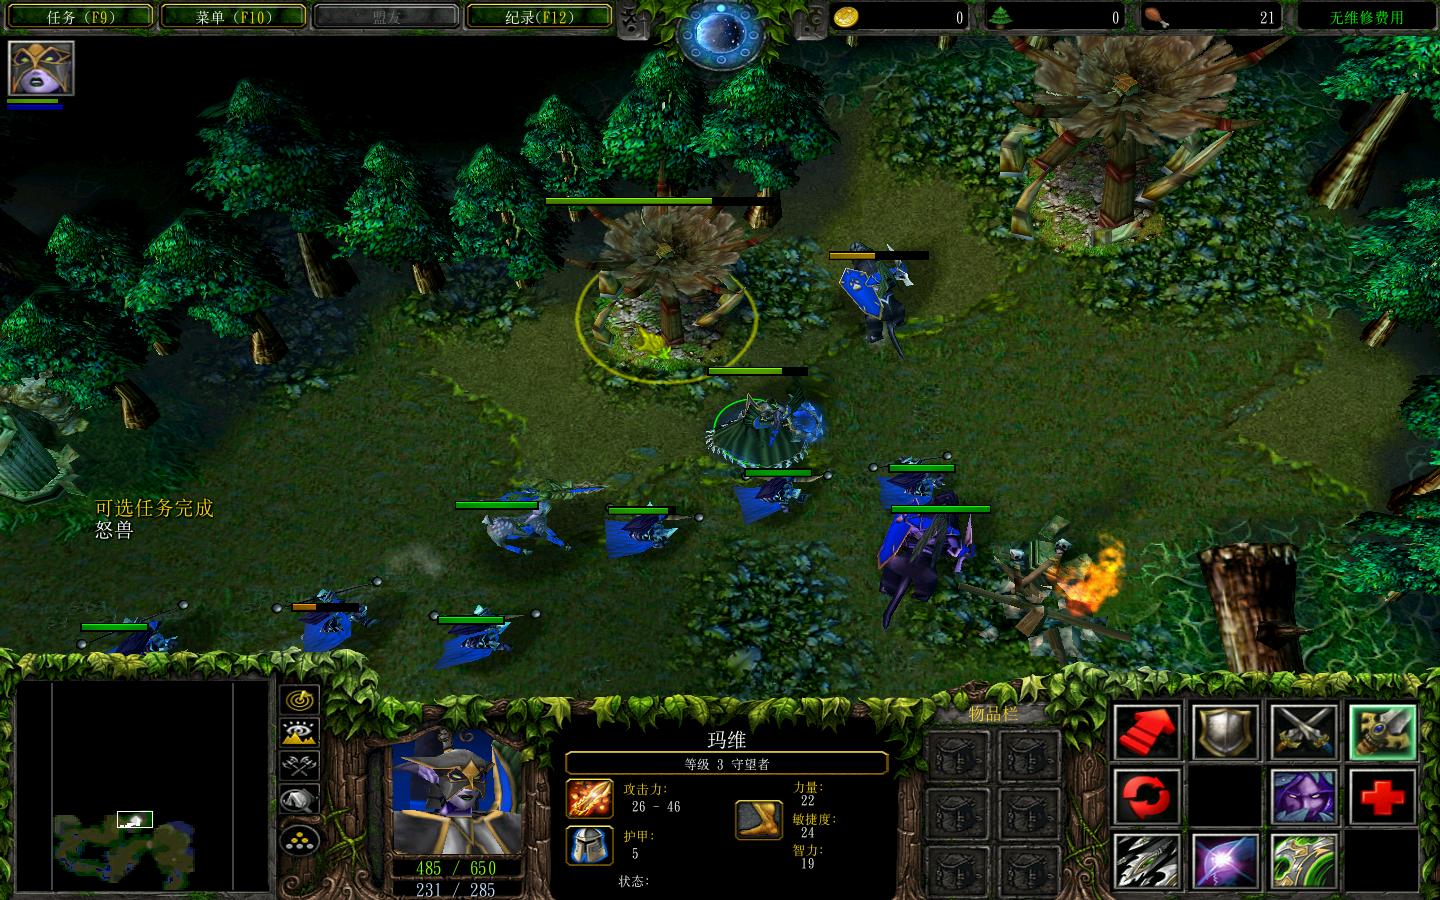 ħ3Warcraft III The Frozen Throne1.24ʥ v1.0δʽ